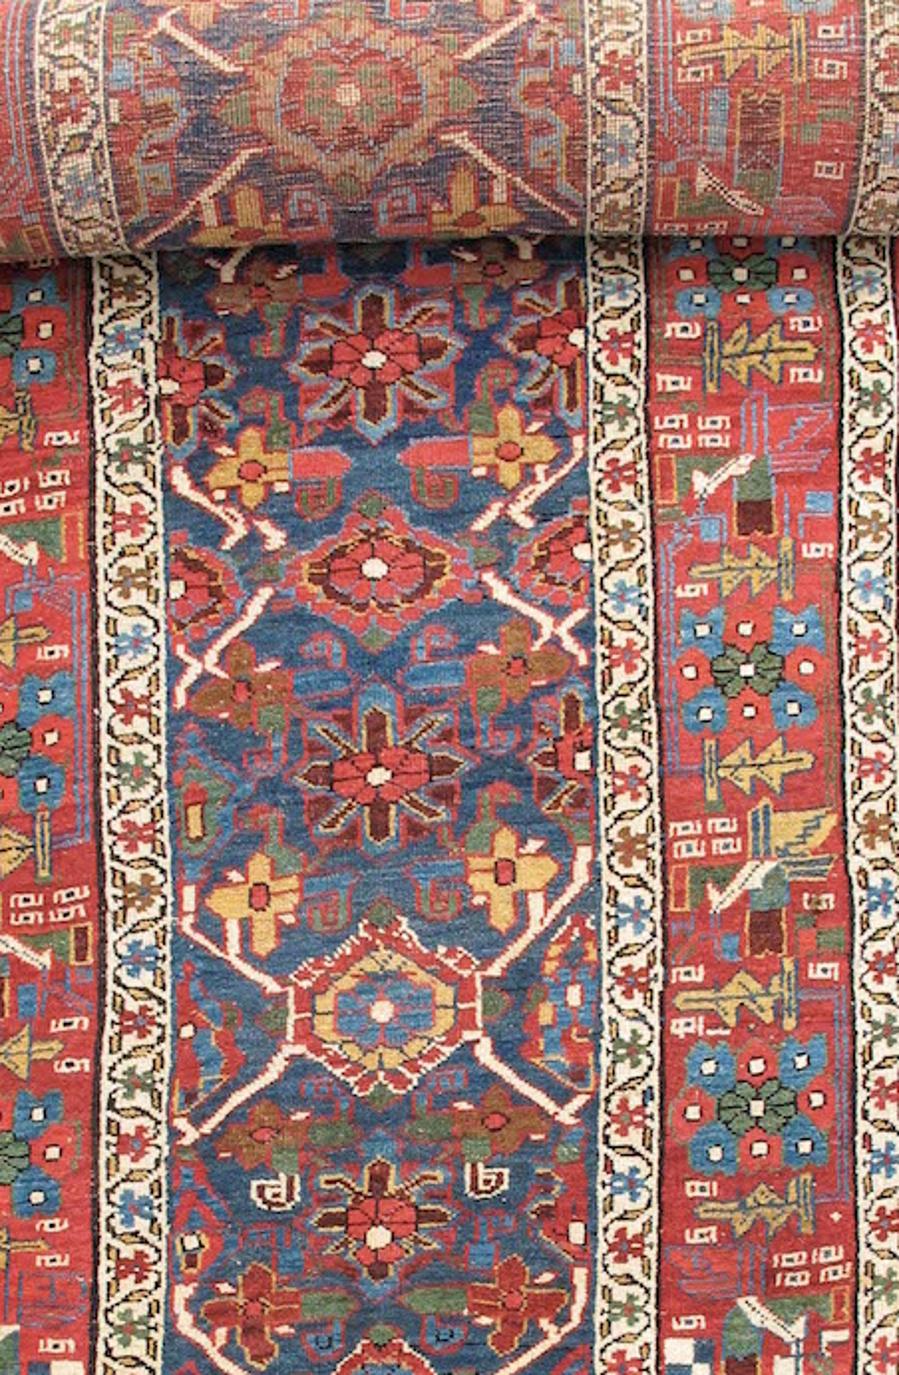 This colorful Bidjar runner uses a classic floral ‘mina khani’ design. The ‘mina khani’ pattern is usually characterized by large alternating floral buds interspersed with a row of smaller flanking jasmine flowers. During the nineteenth-century it